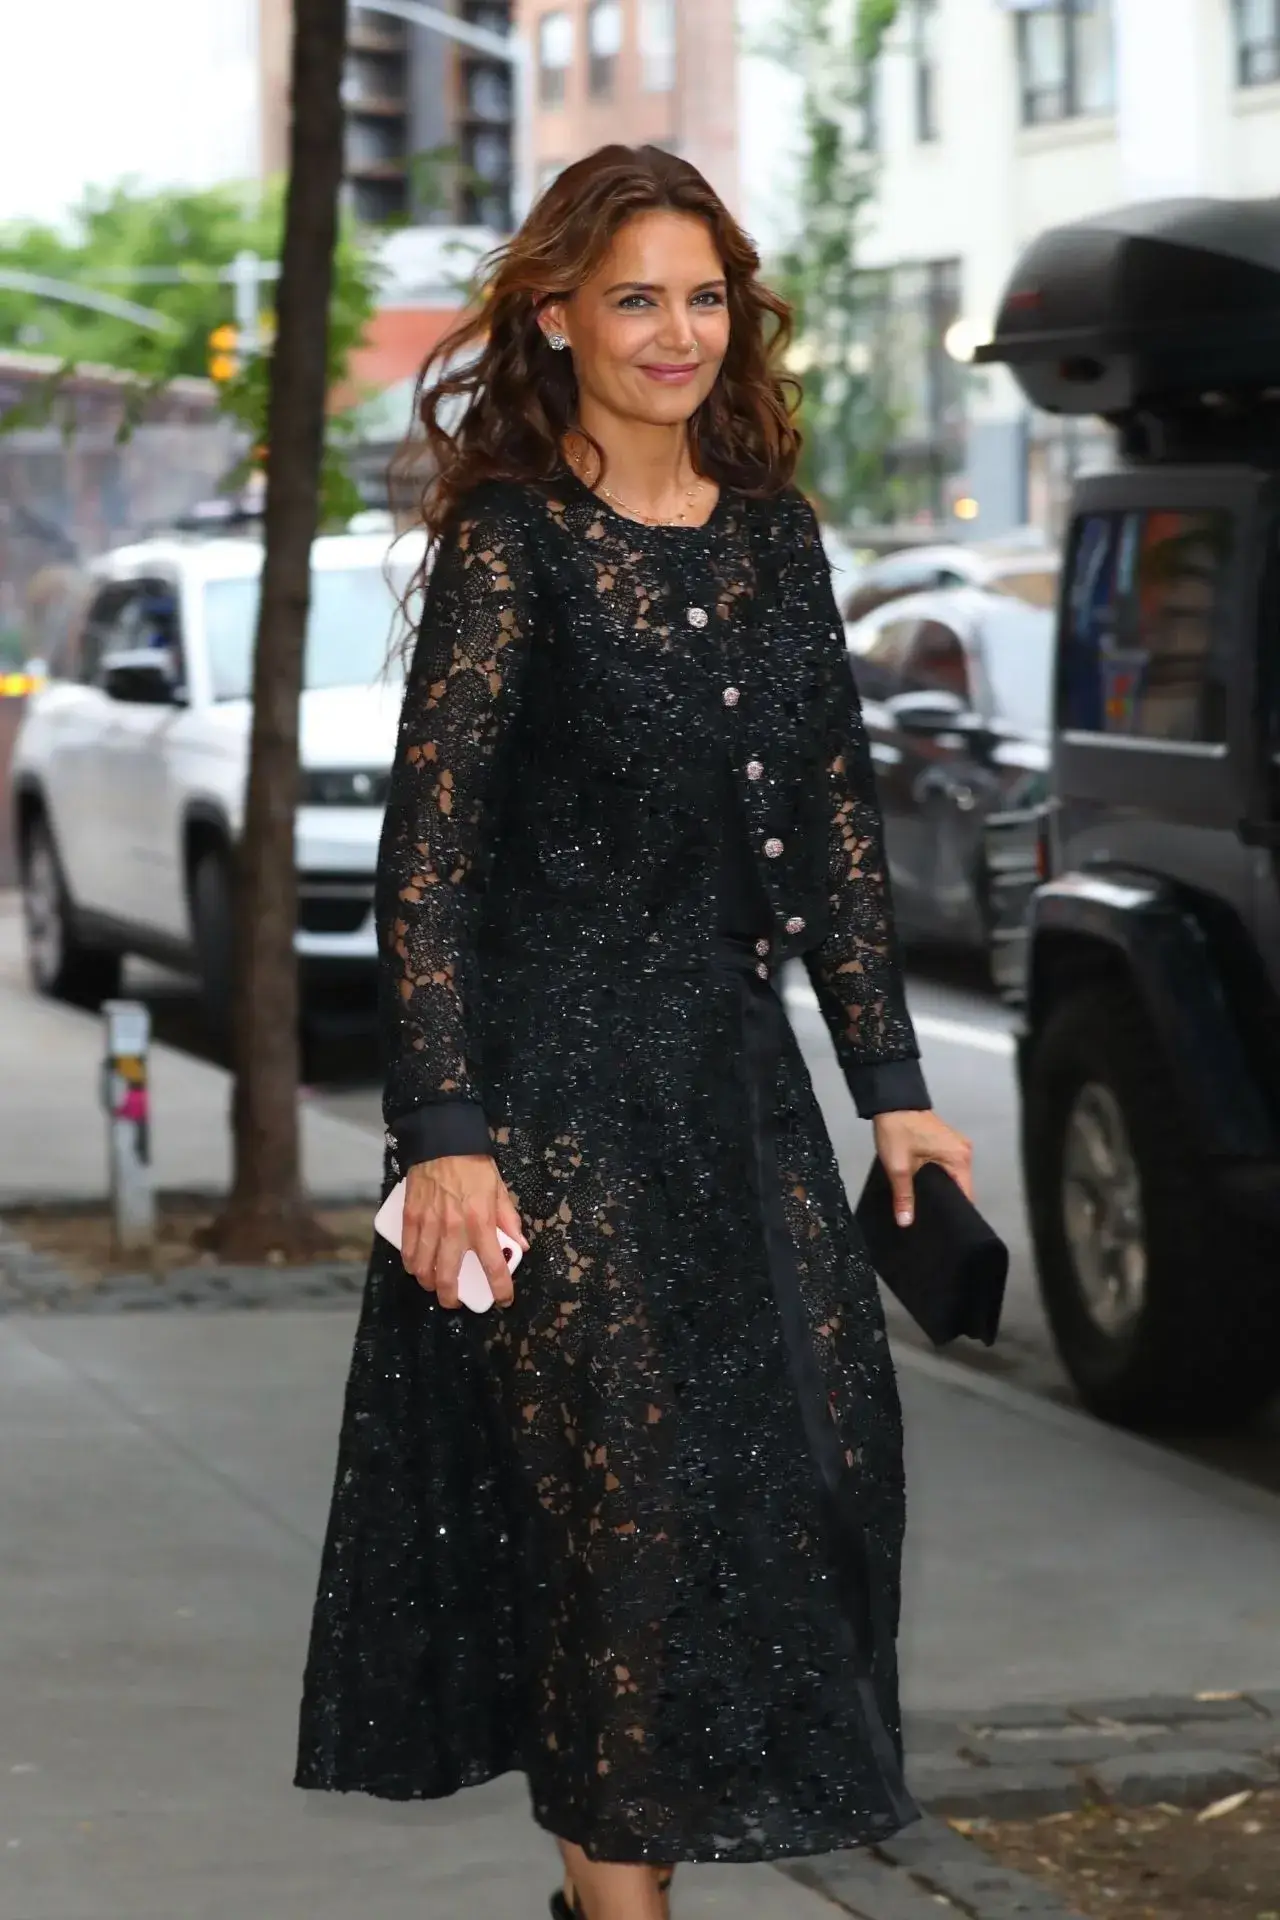 KATIE HOLMES SEEN IN A STUNNING BLACK DRESS IN NEW YORK CITY STREETS 8